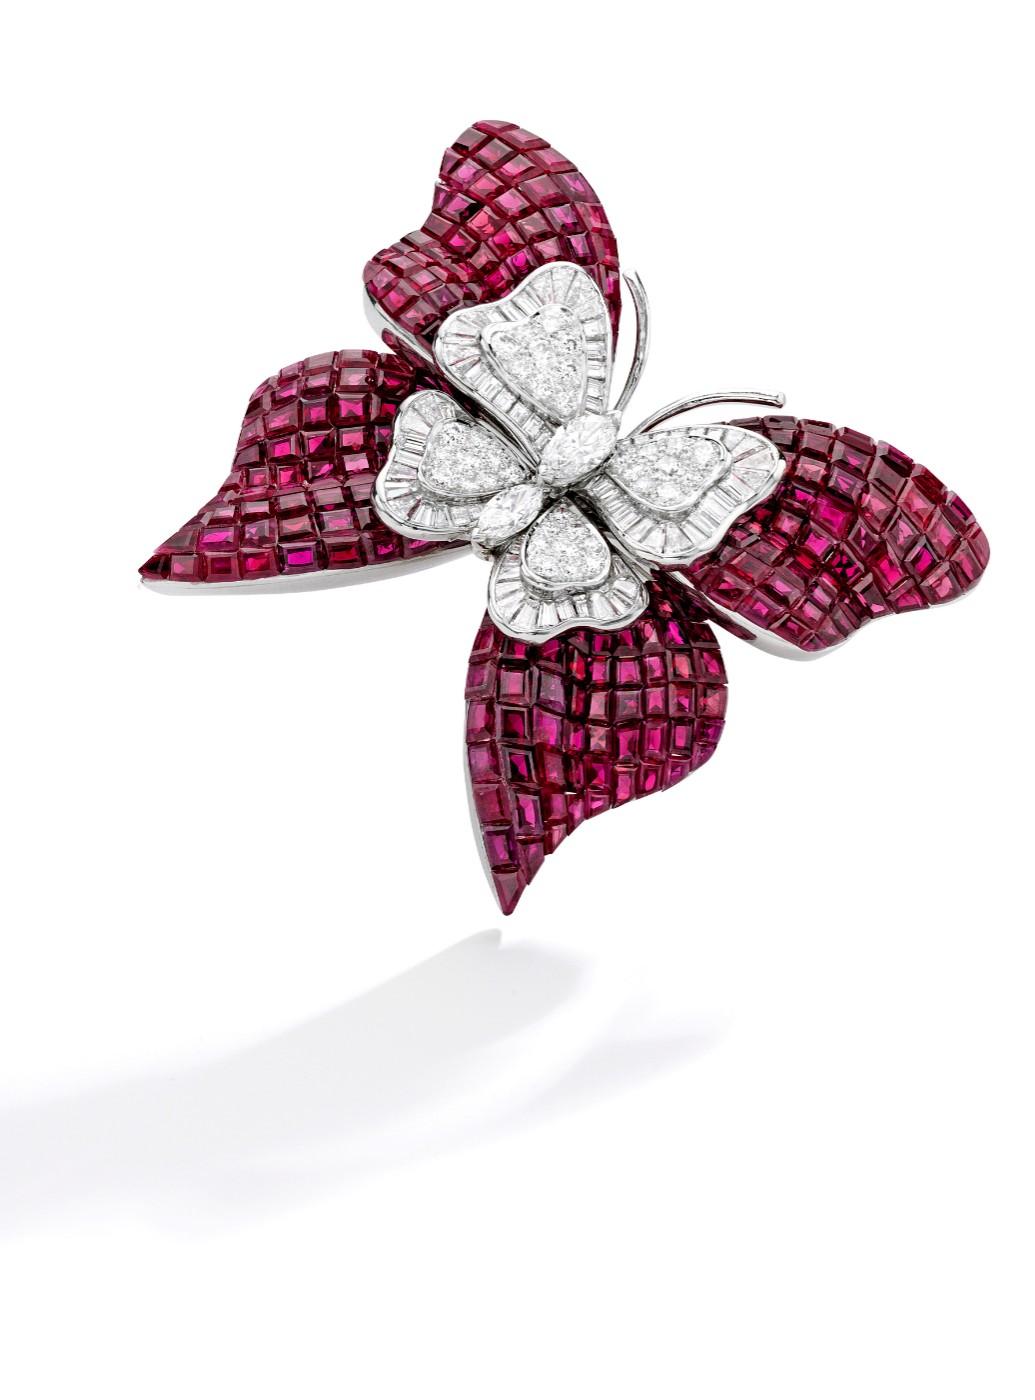 Mystery-Set Ruby and Diamond Butterfly Brooch by Van Cleef & Arpels